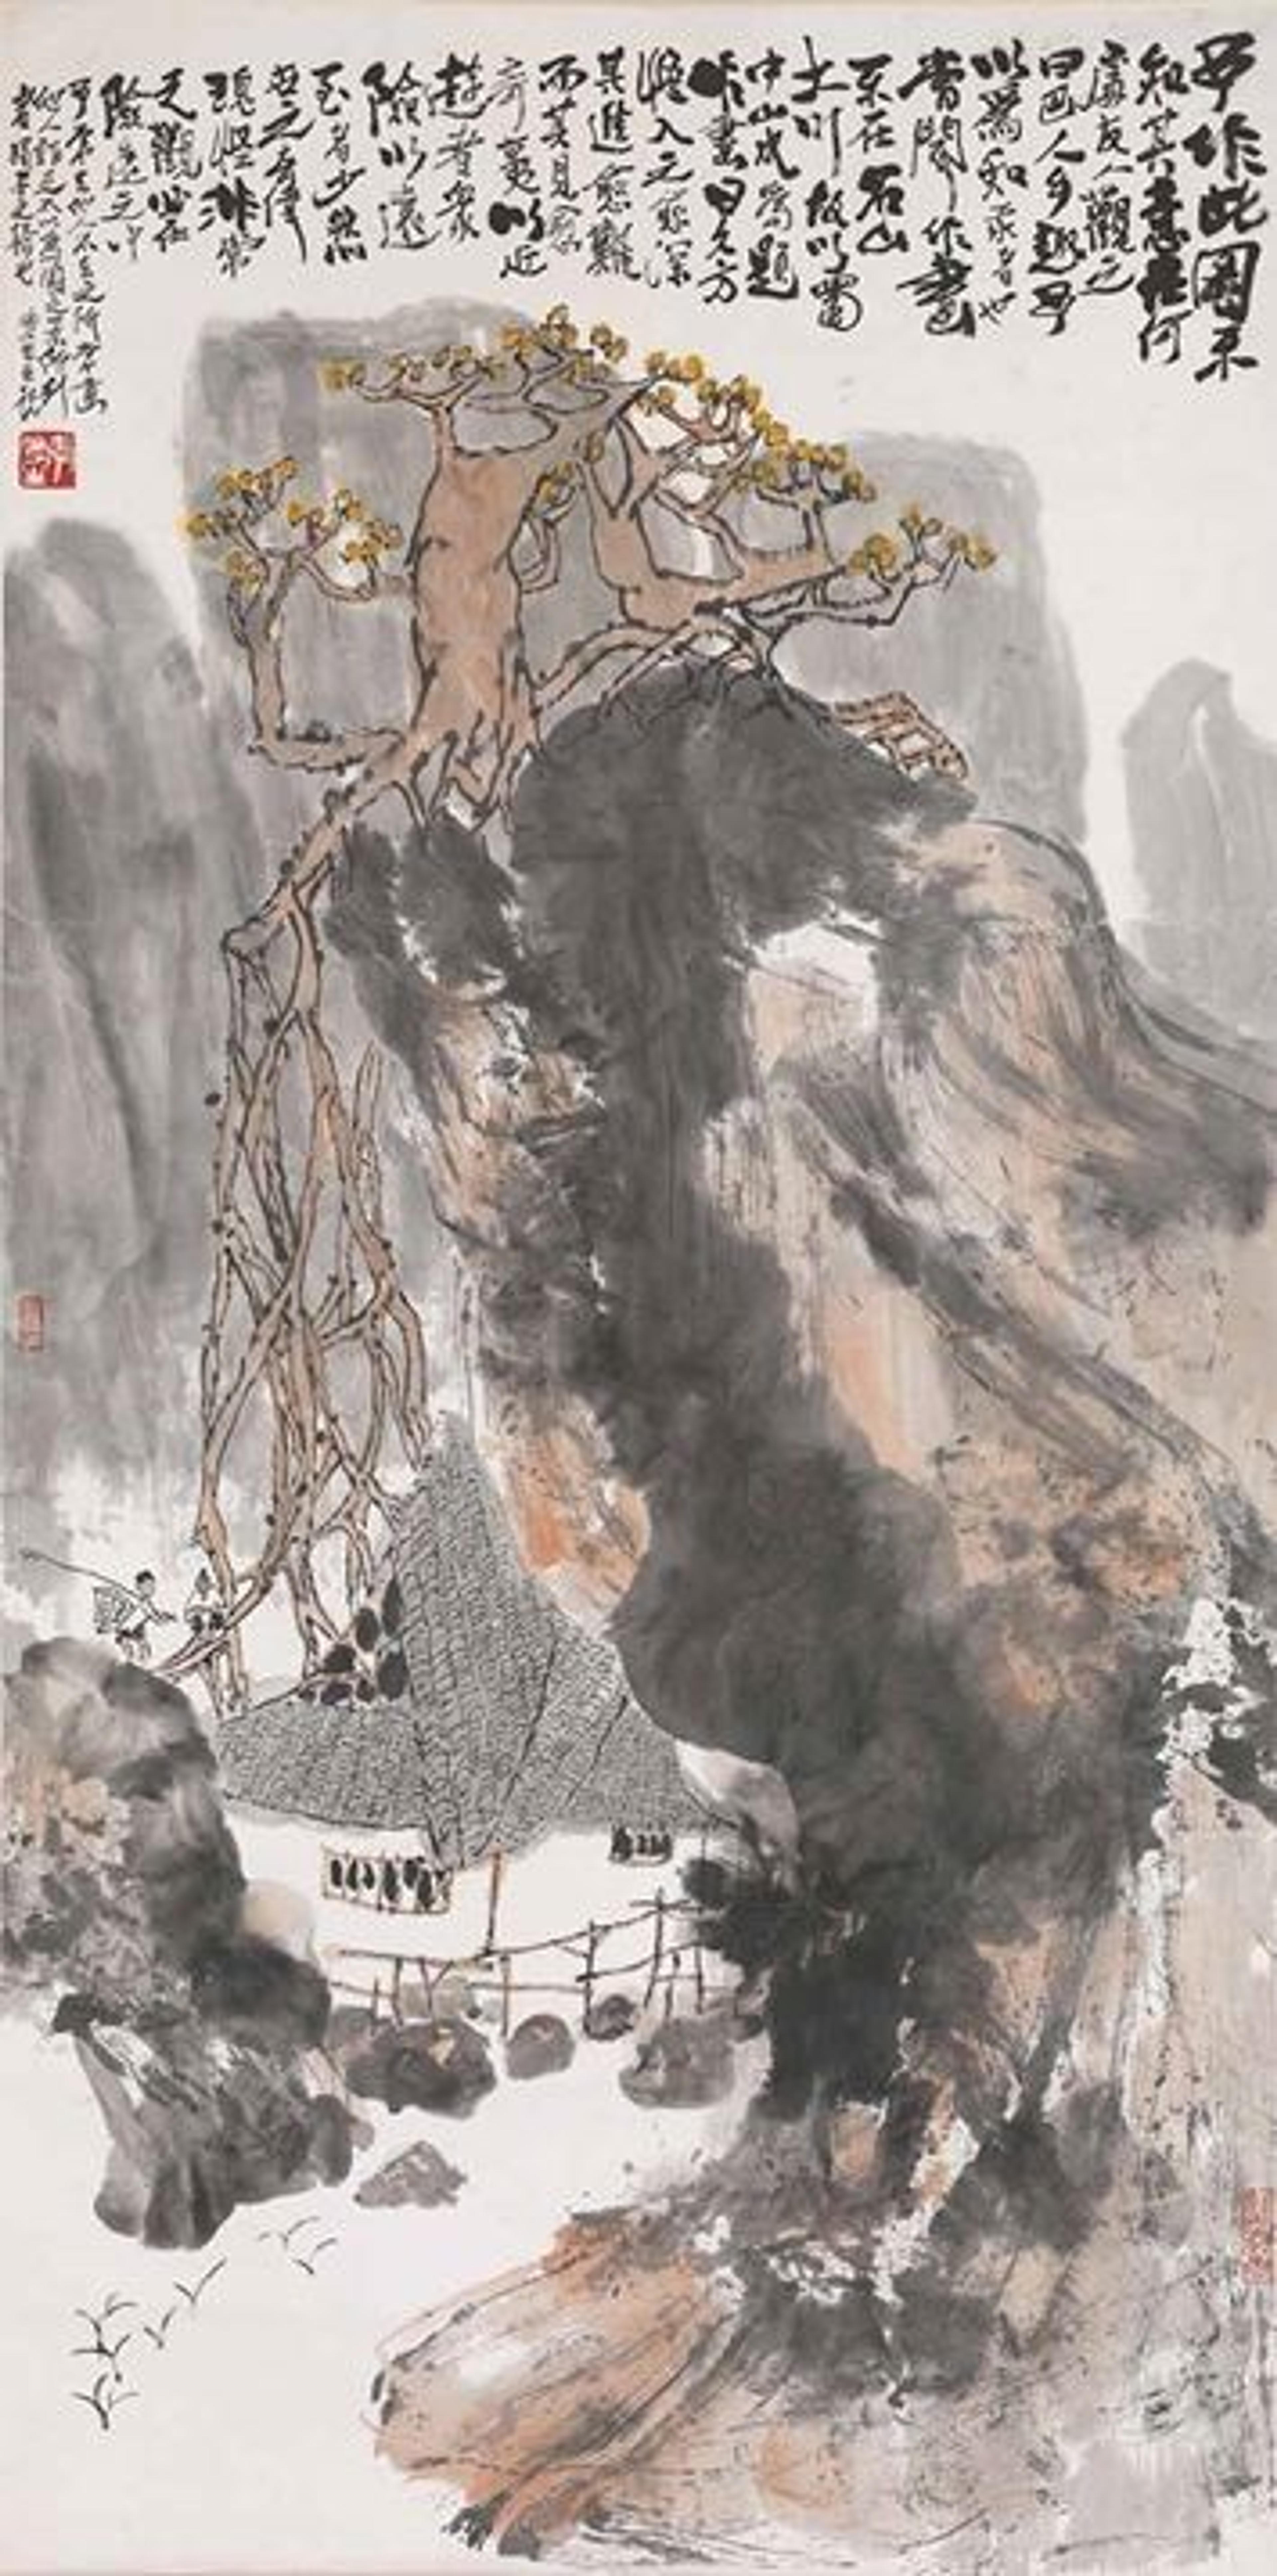 Hanging scroll depicting high bluff with tree at the top